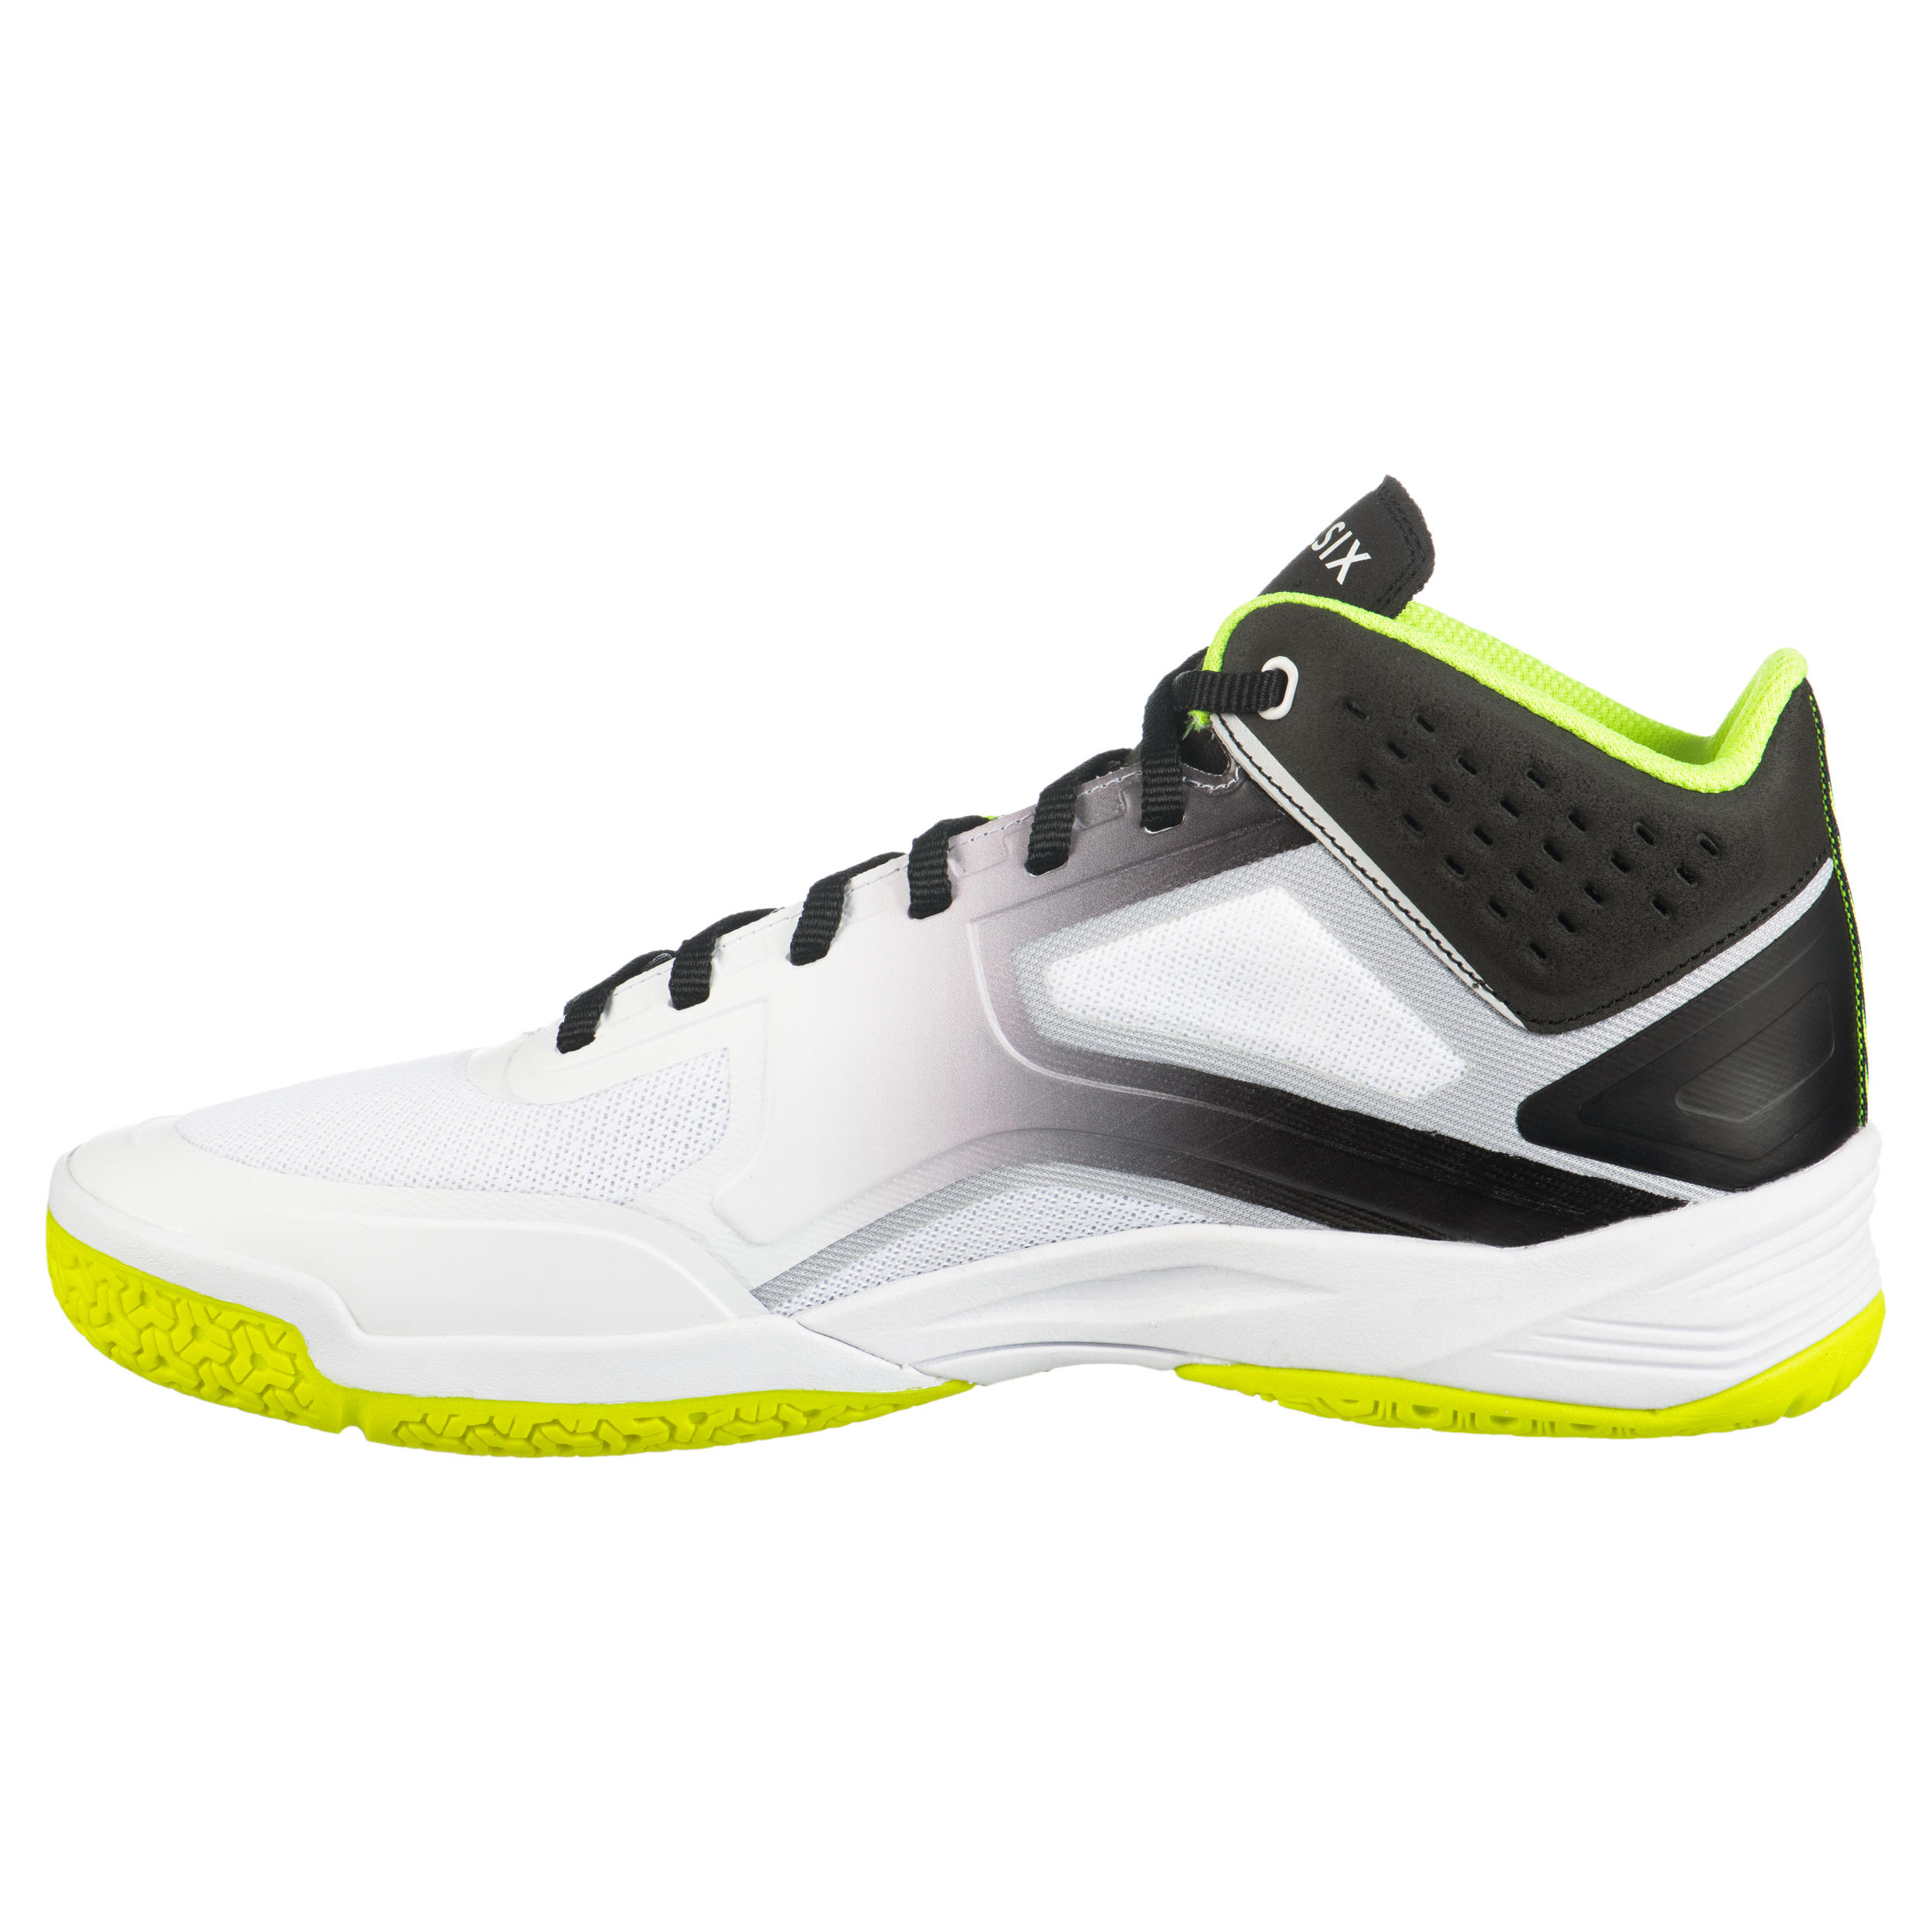 Men's Volleyball Mid Shoes V500 - White/Yellow/Black 2/8